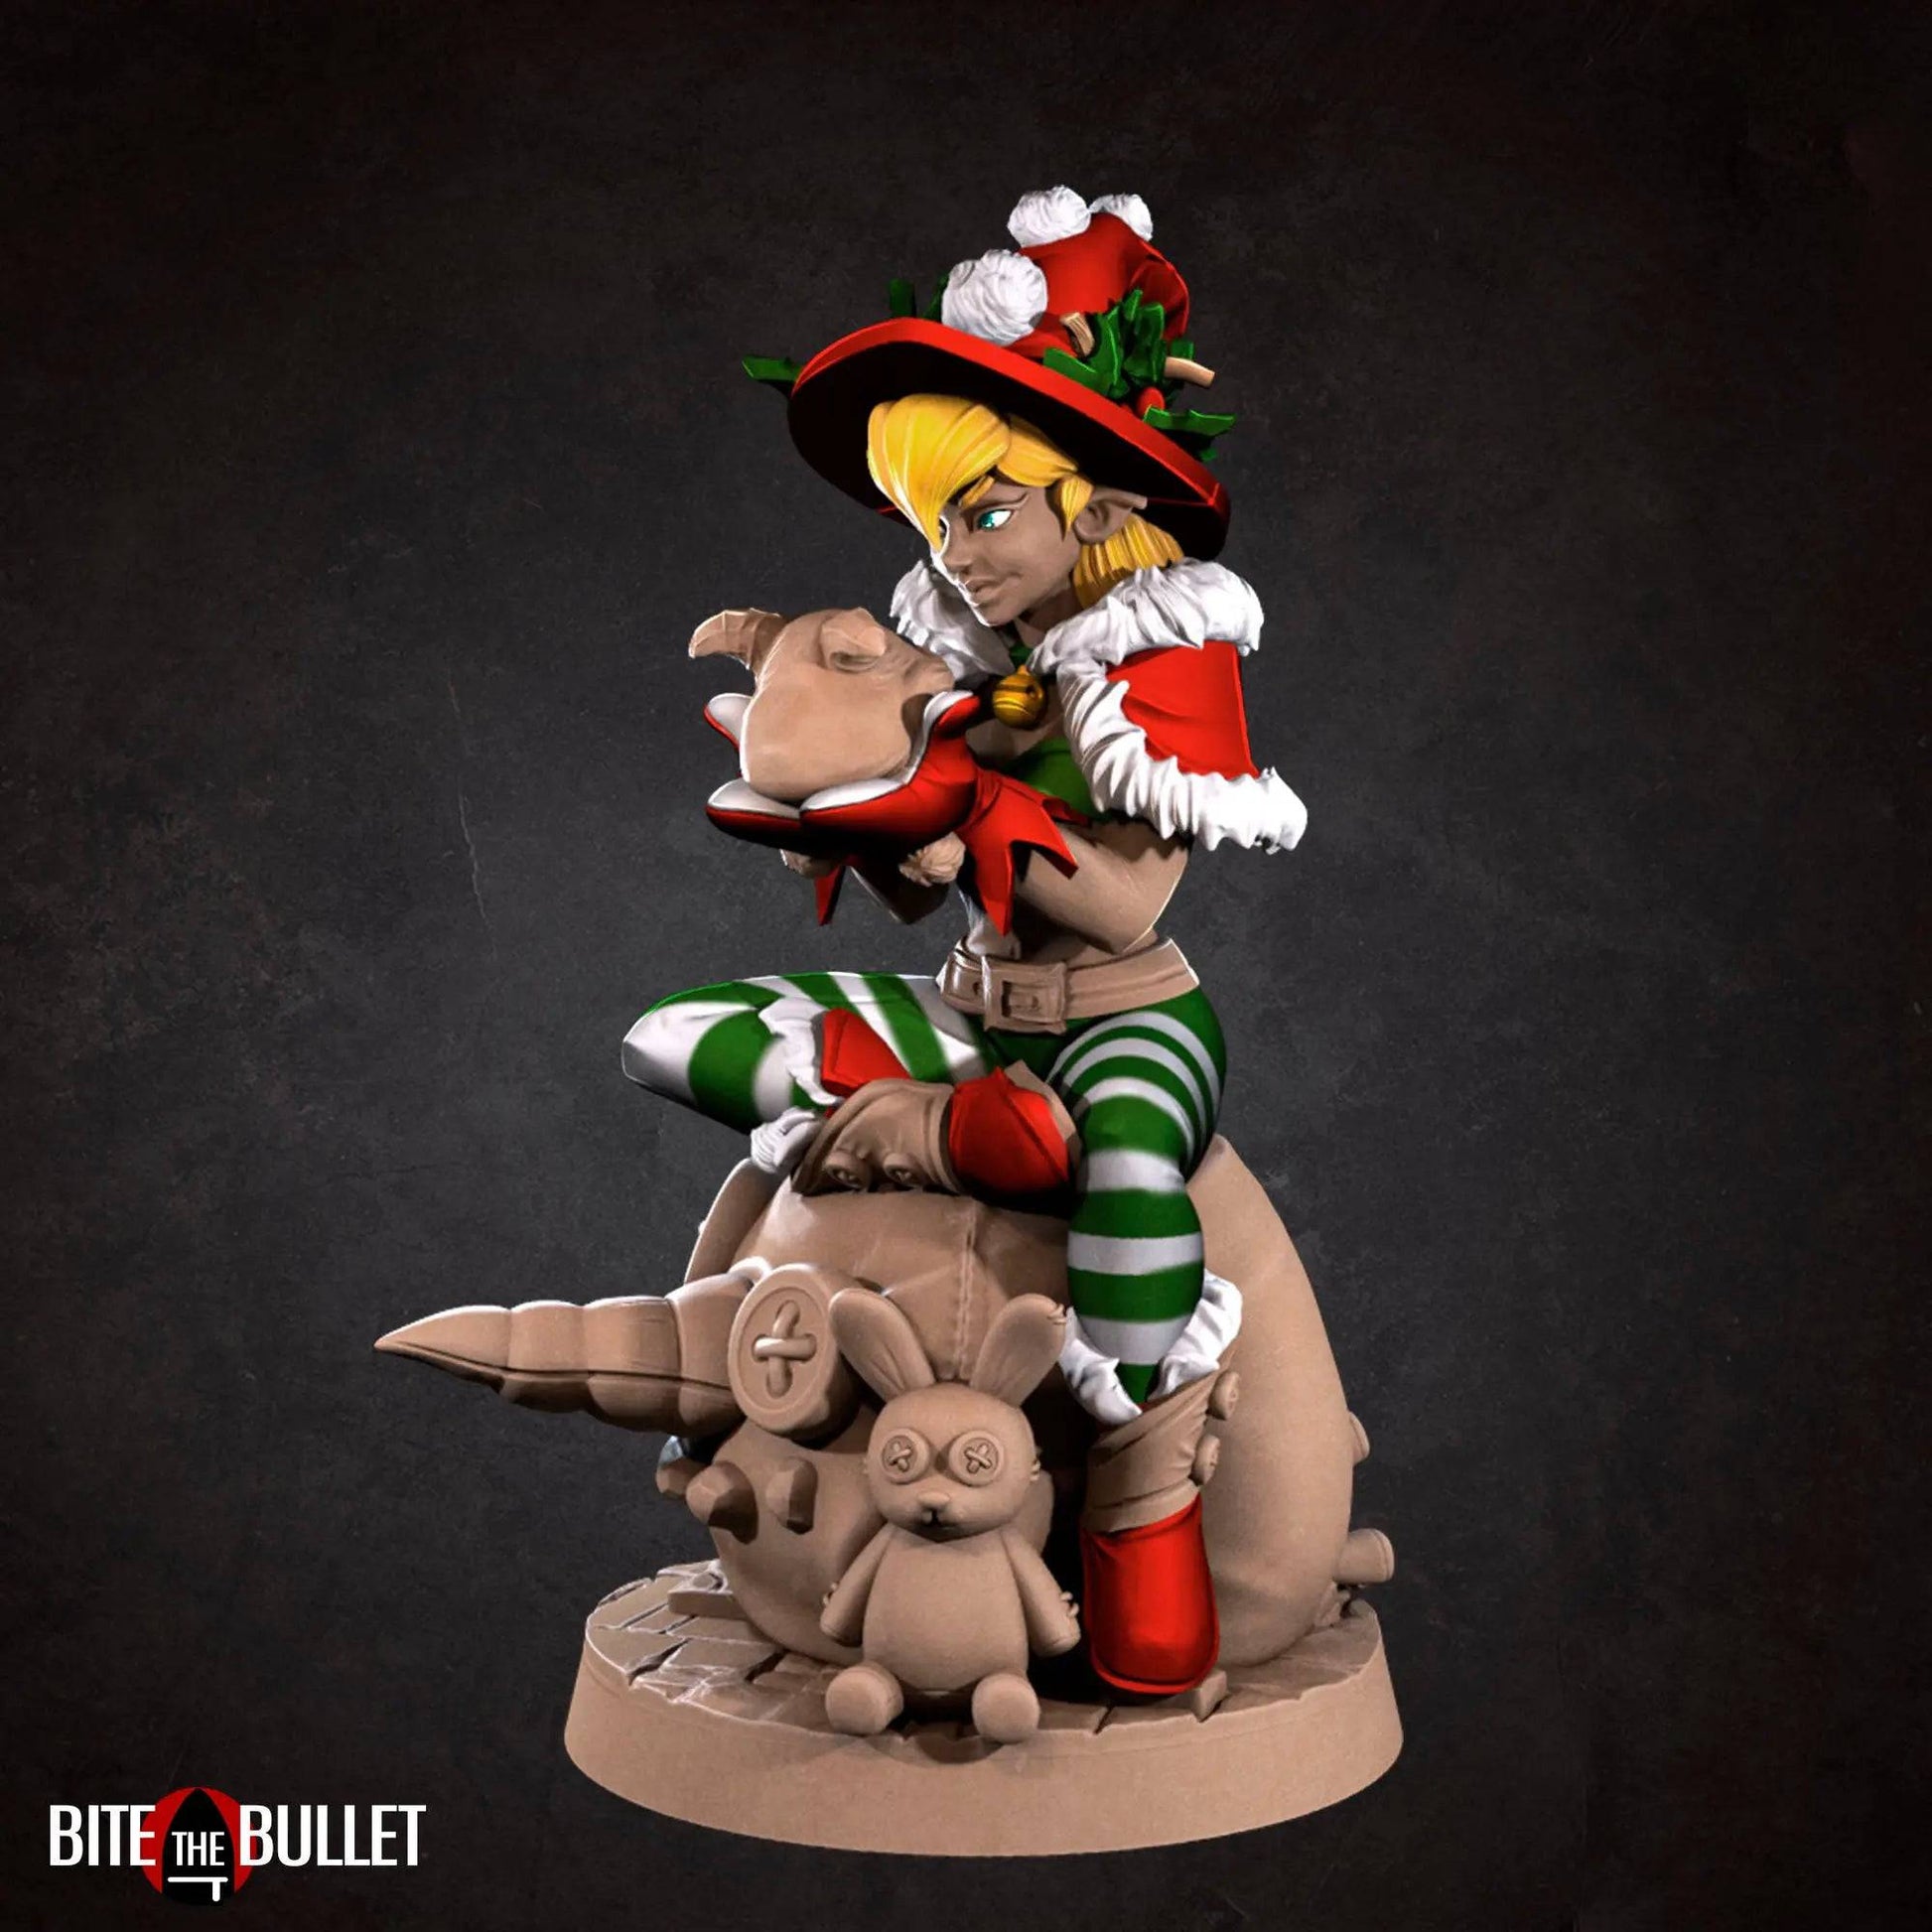 Jingle, Pinup SFW NSFW Lovely Woman, Christmas Elf Gnome Sprite | D&D Miniature Pinup | Bite the Bullet - Tattles Told 3D